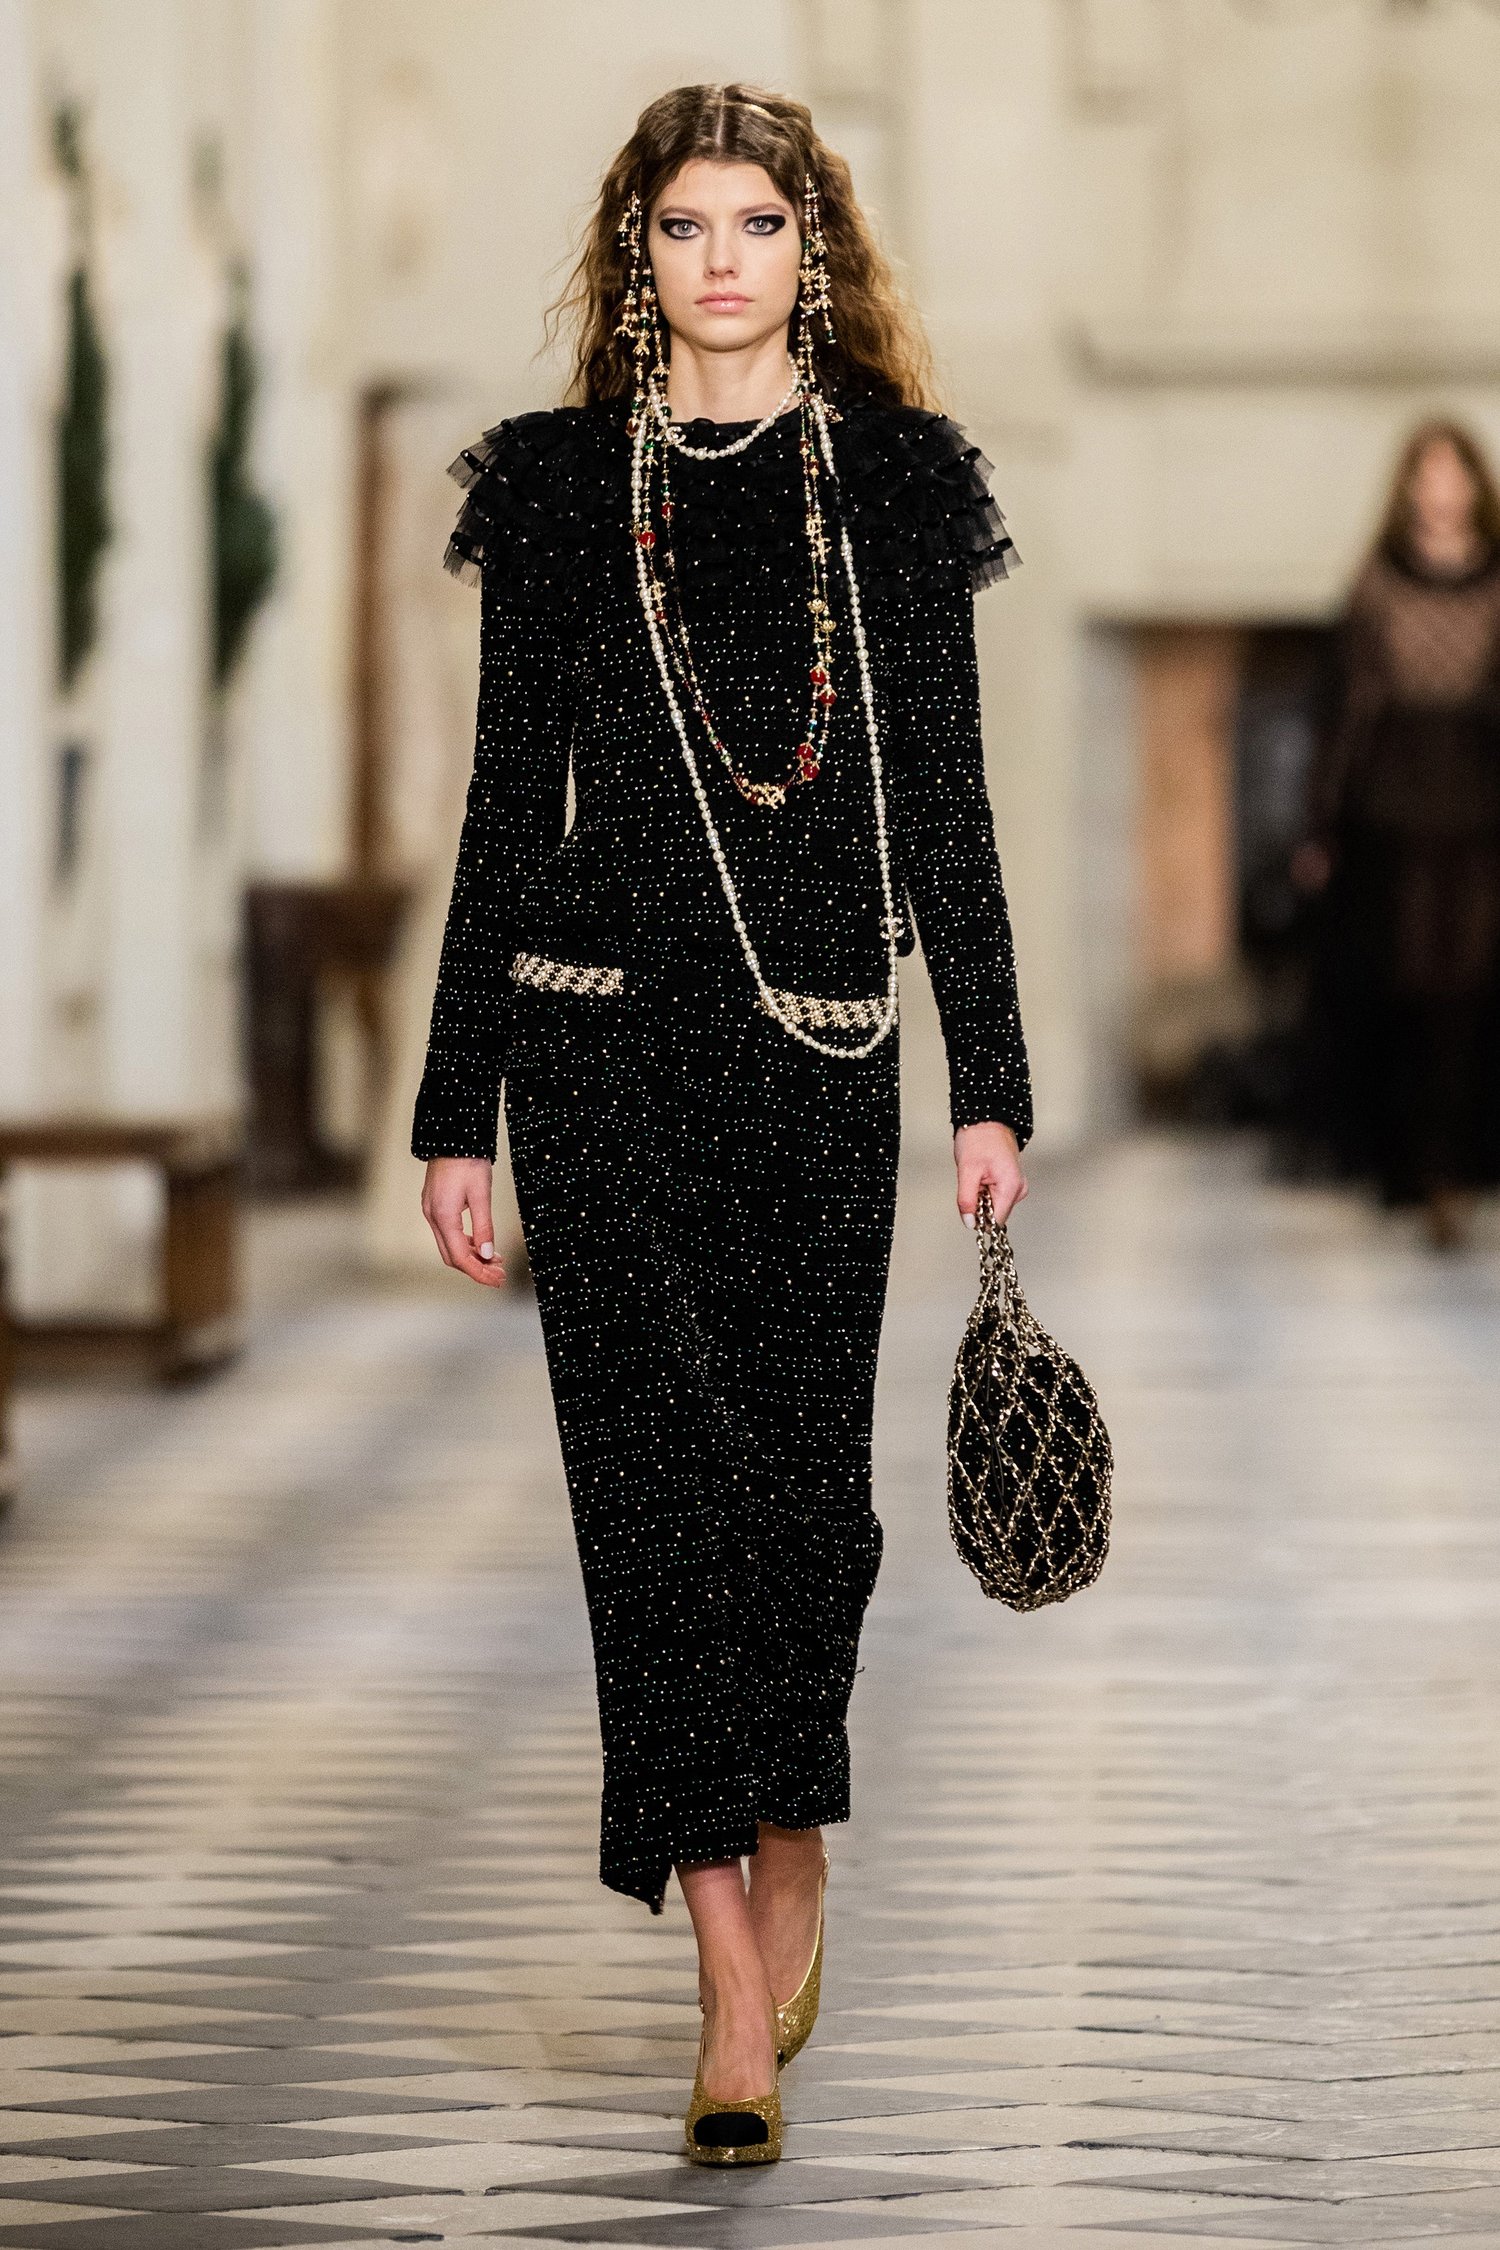 Chanel Resort 2011 Black and Gold Tweed Dress in 2023